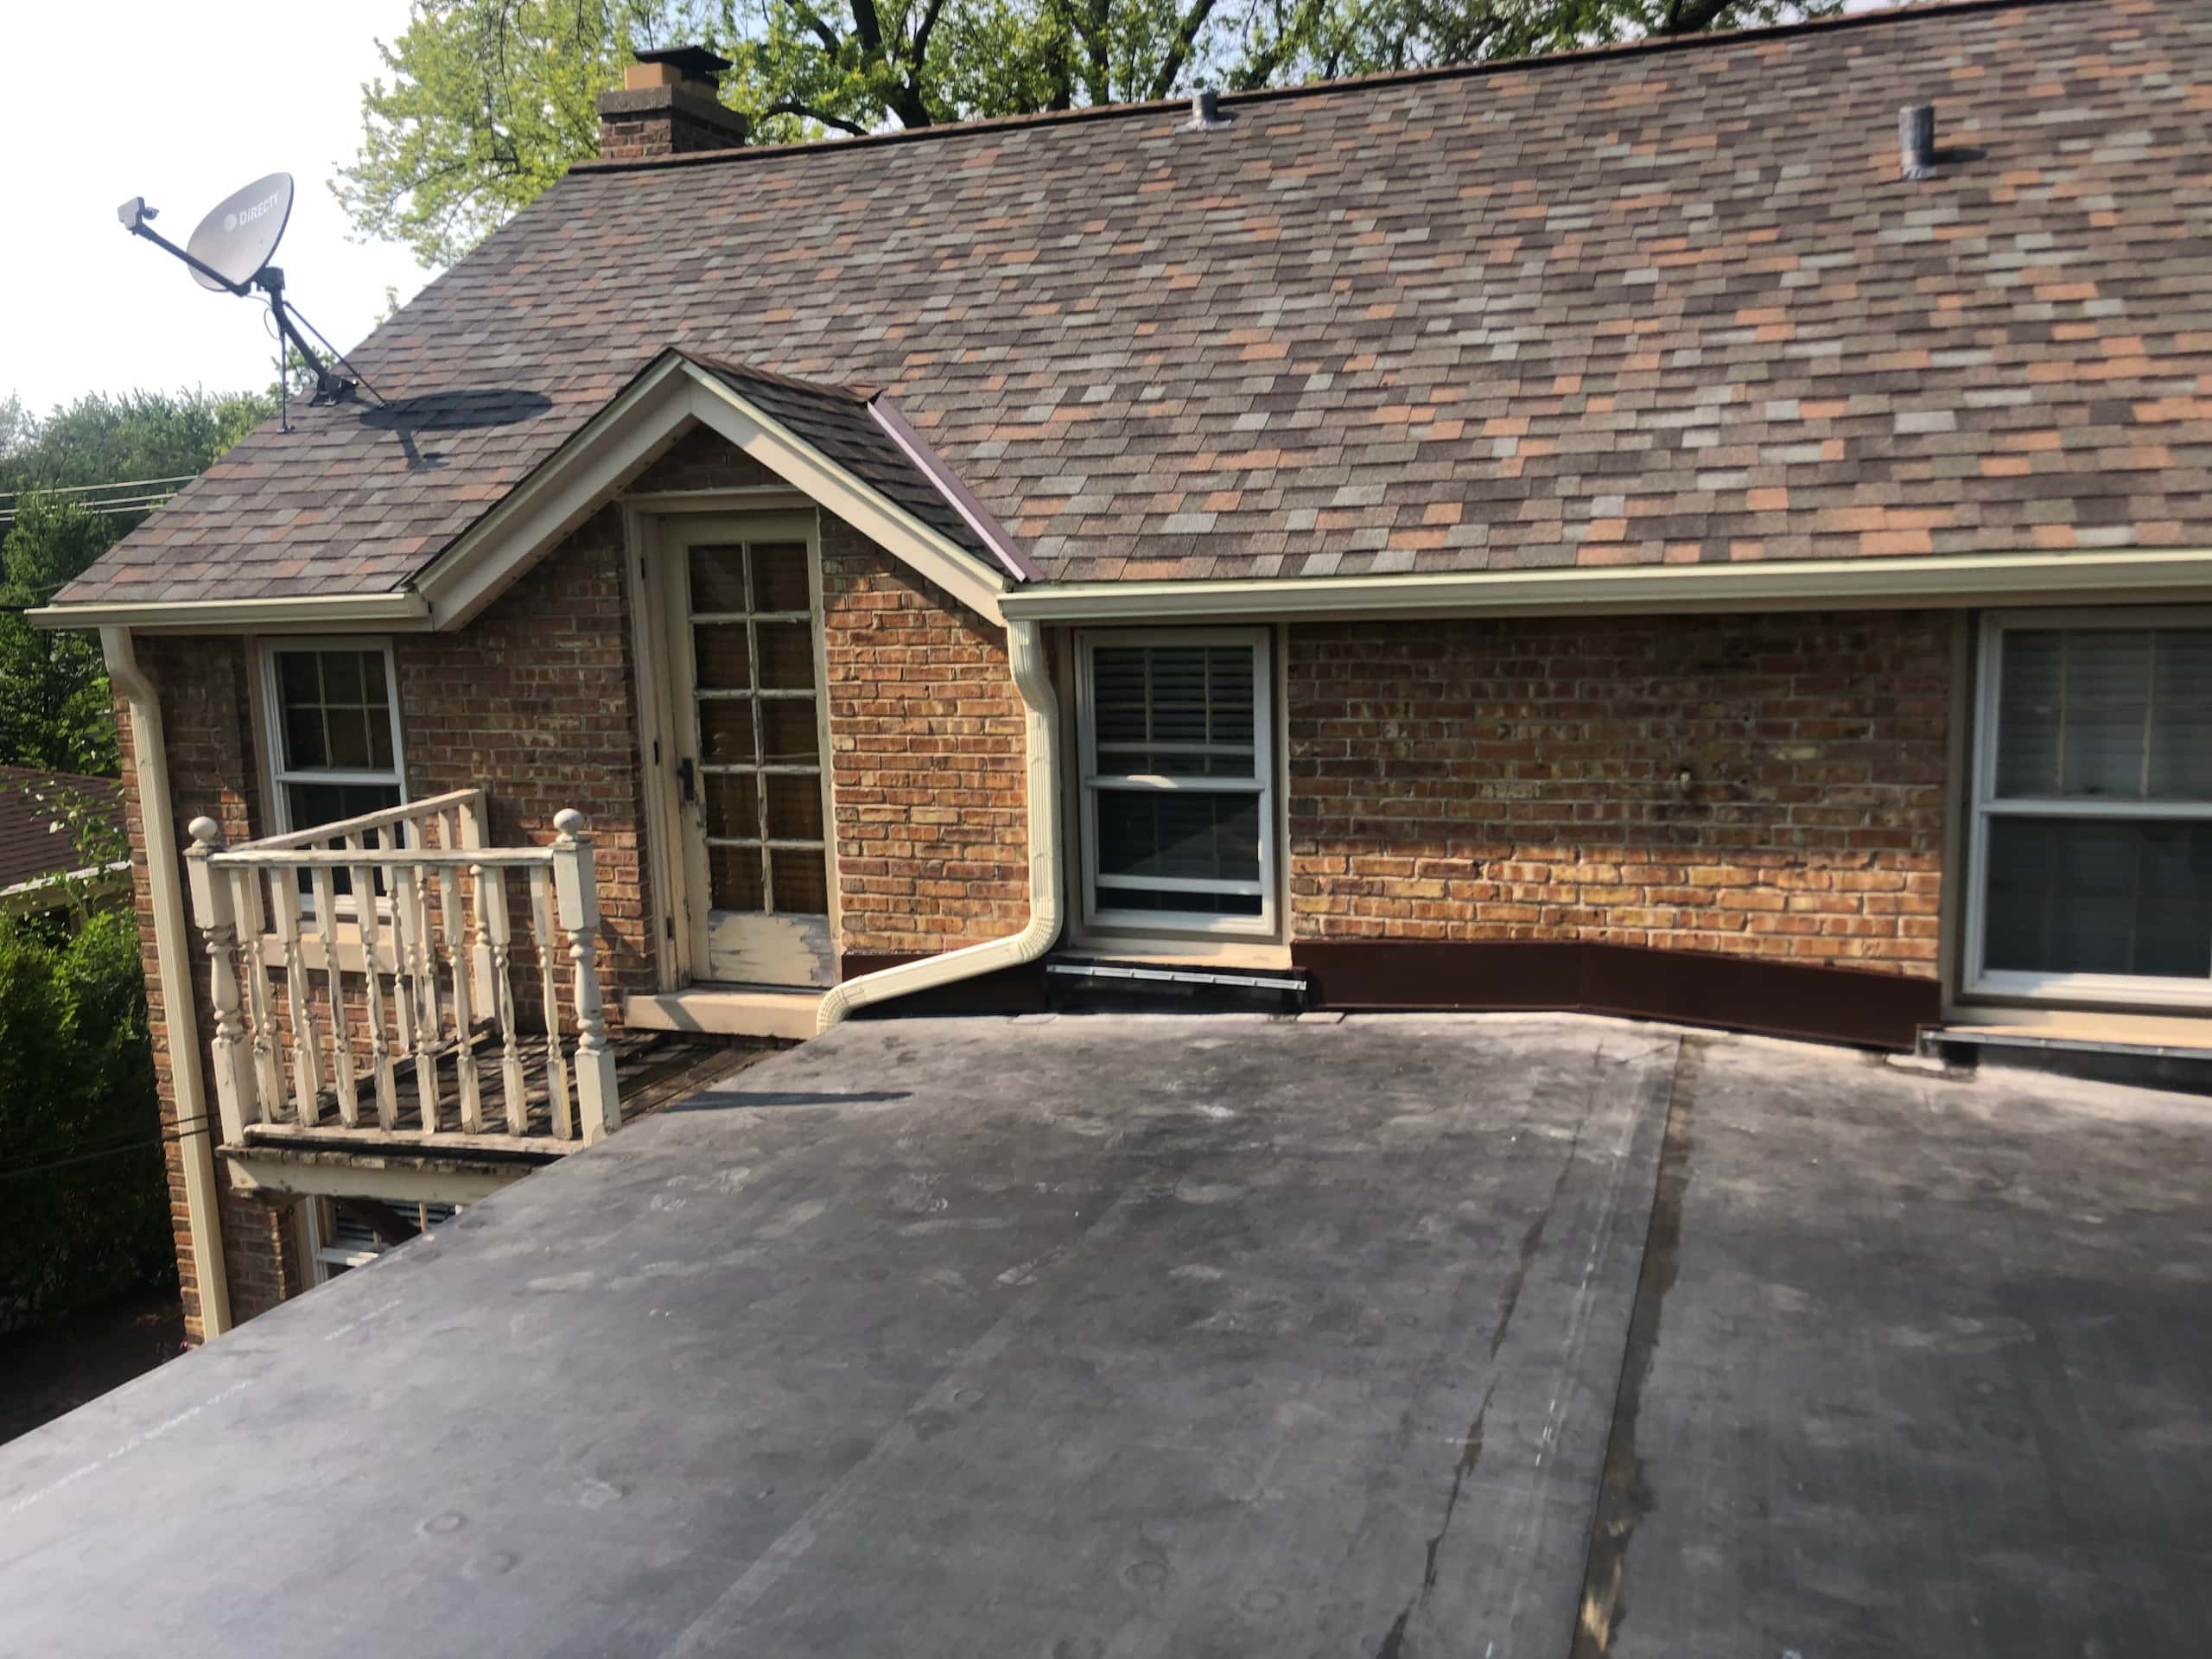 Wisconsin Roofing | Owens Corning Designer Shingles | Aged Copper | Complete